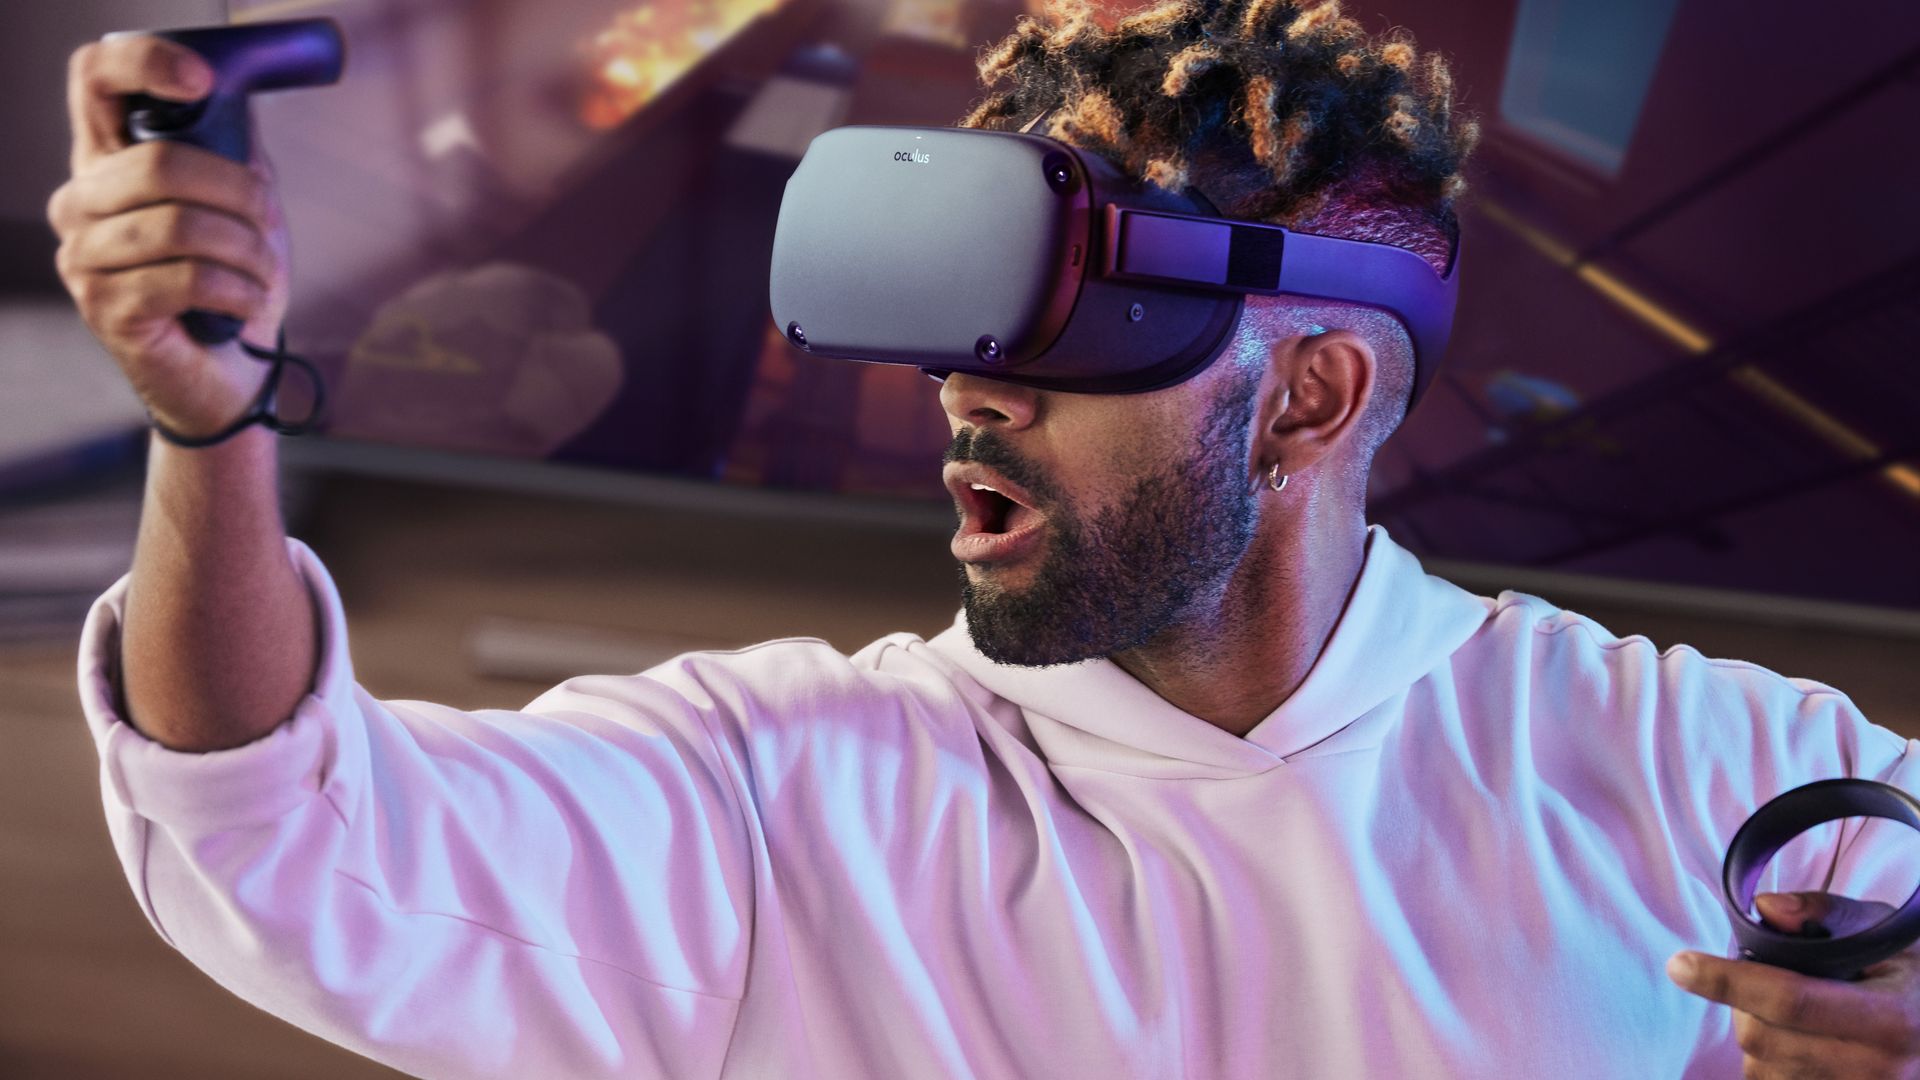 A man tries out the Oculus Quest VR headset